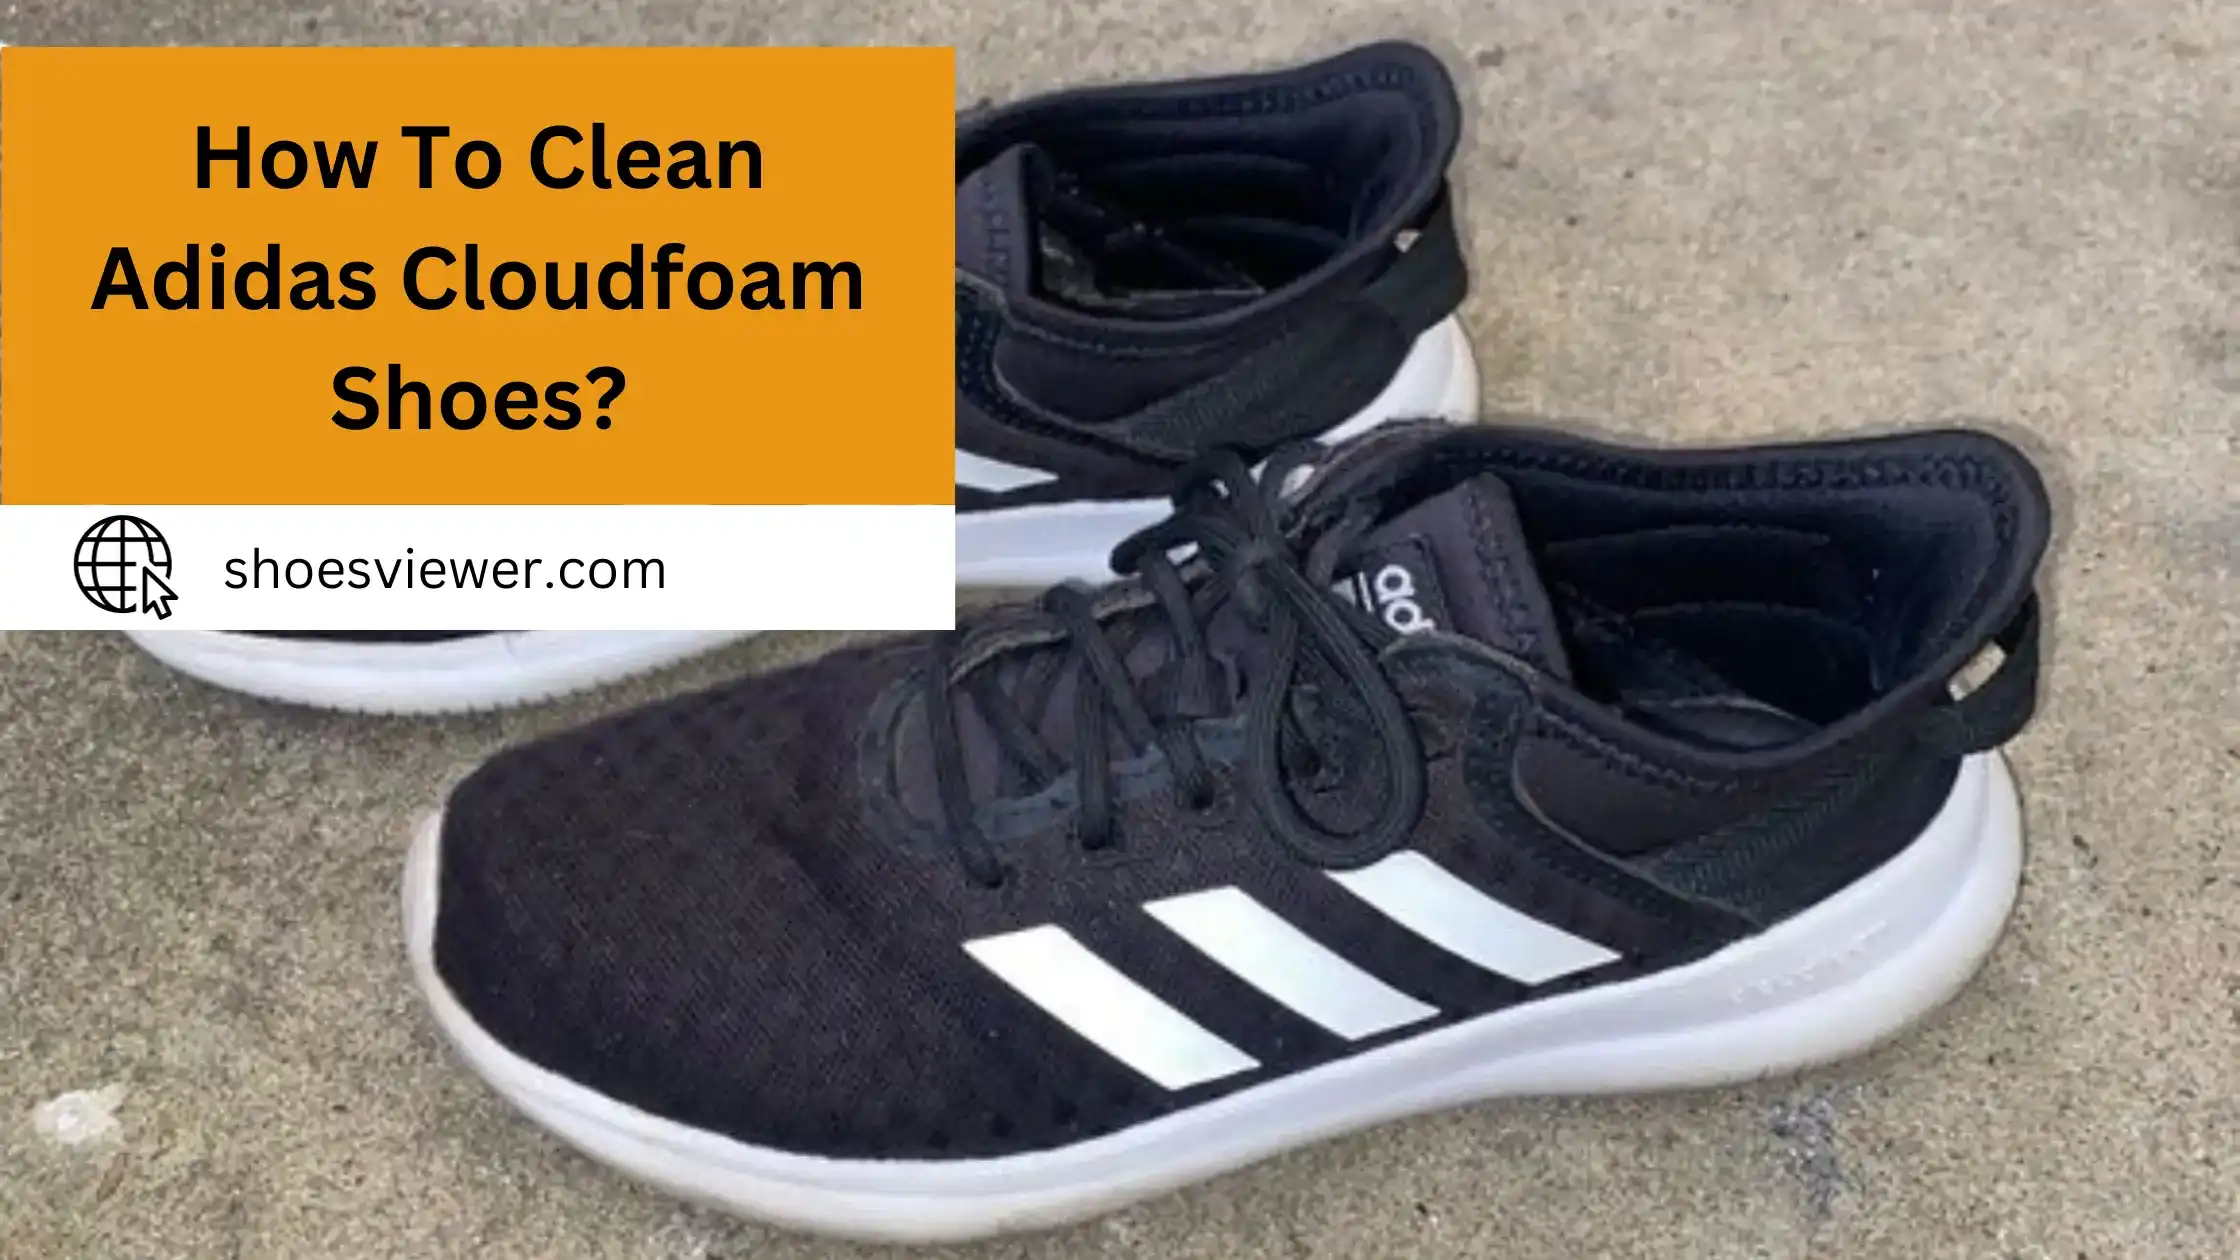 How To Clean Adidas Cloudfoam Shoes? Cleaning Instructions